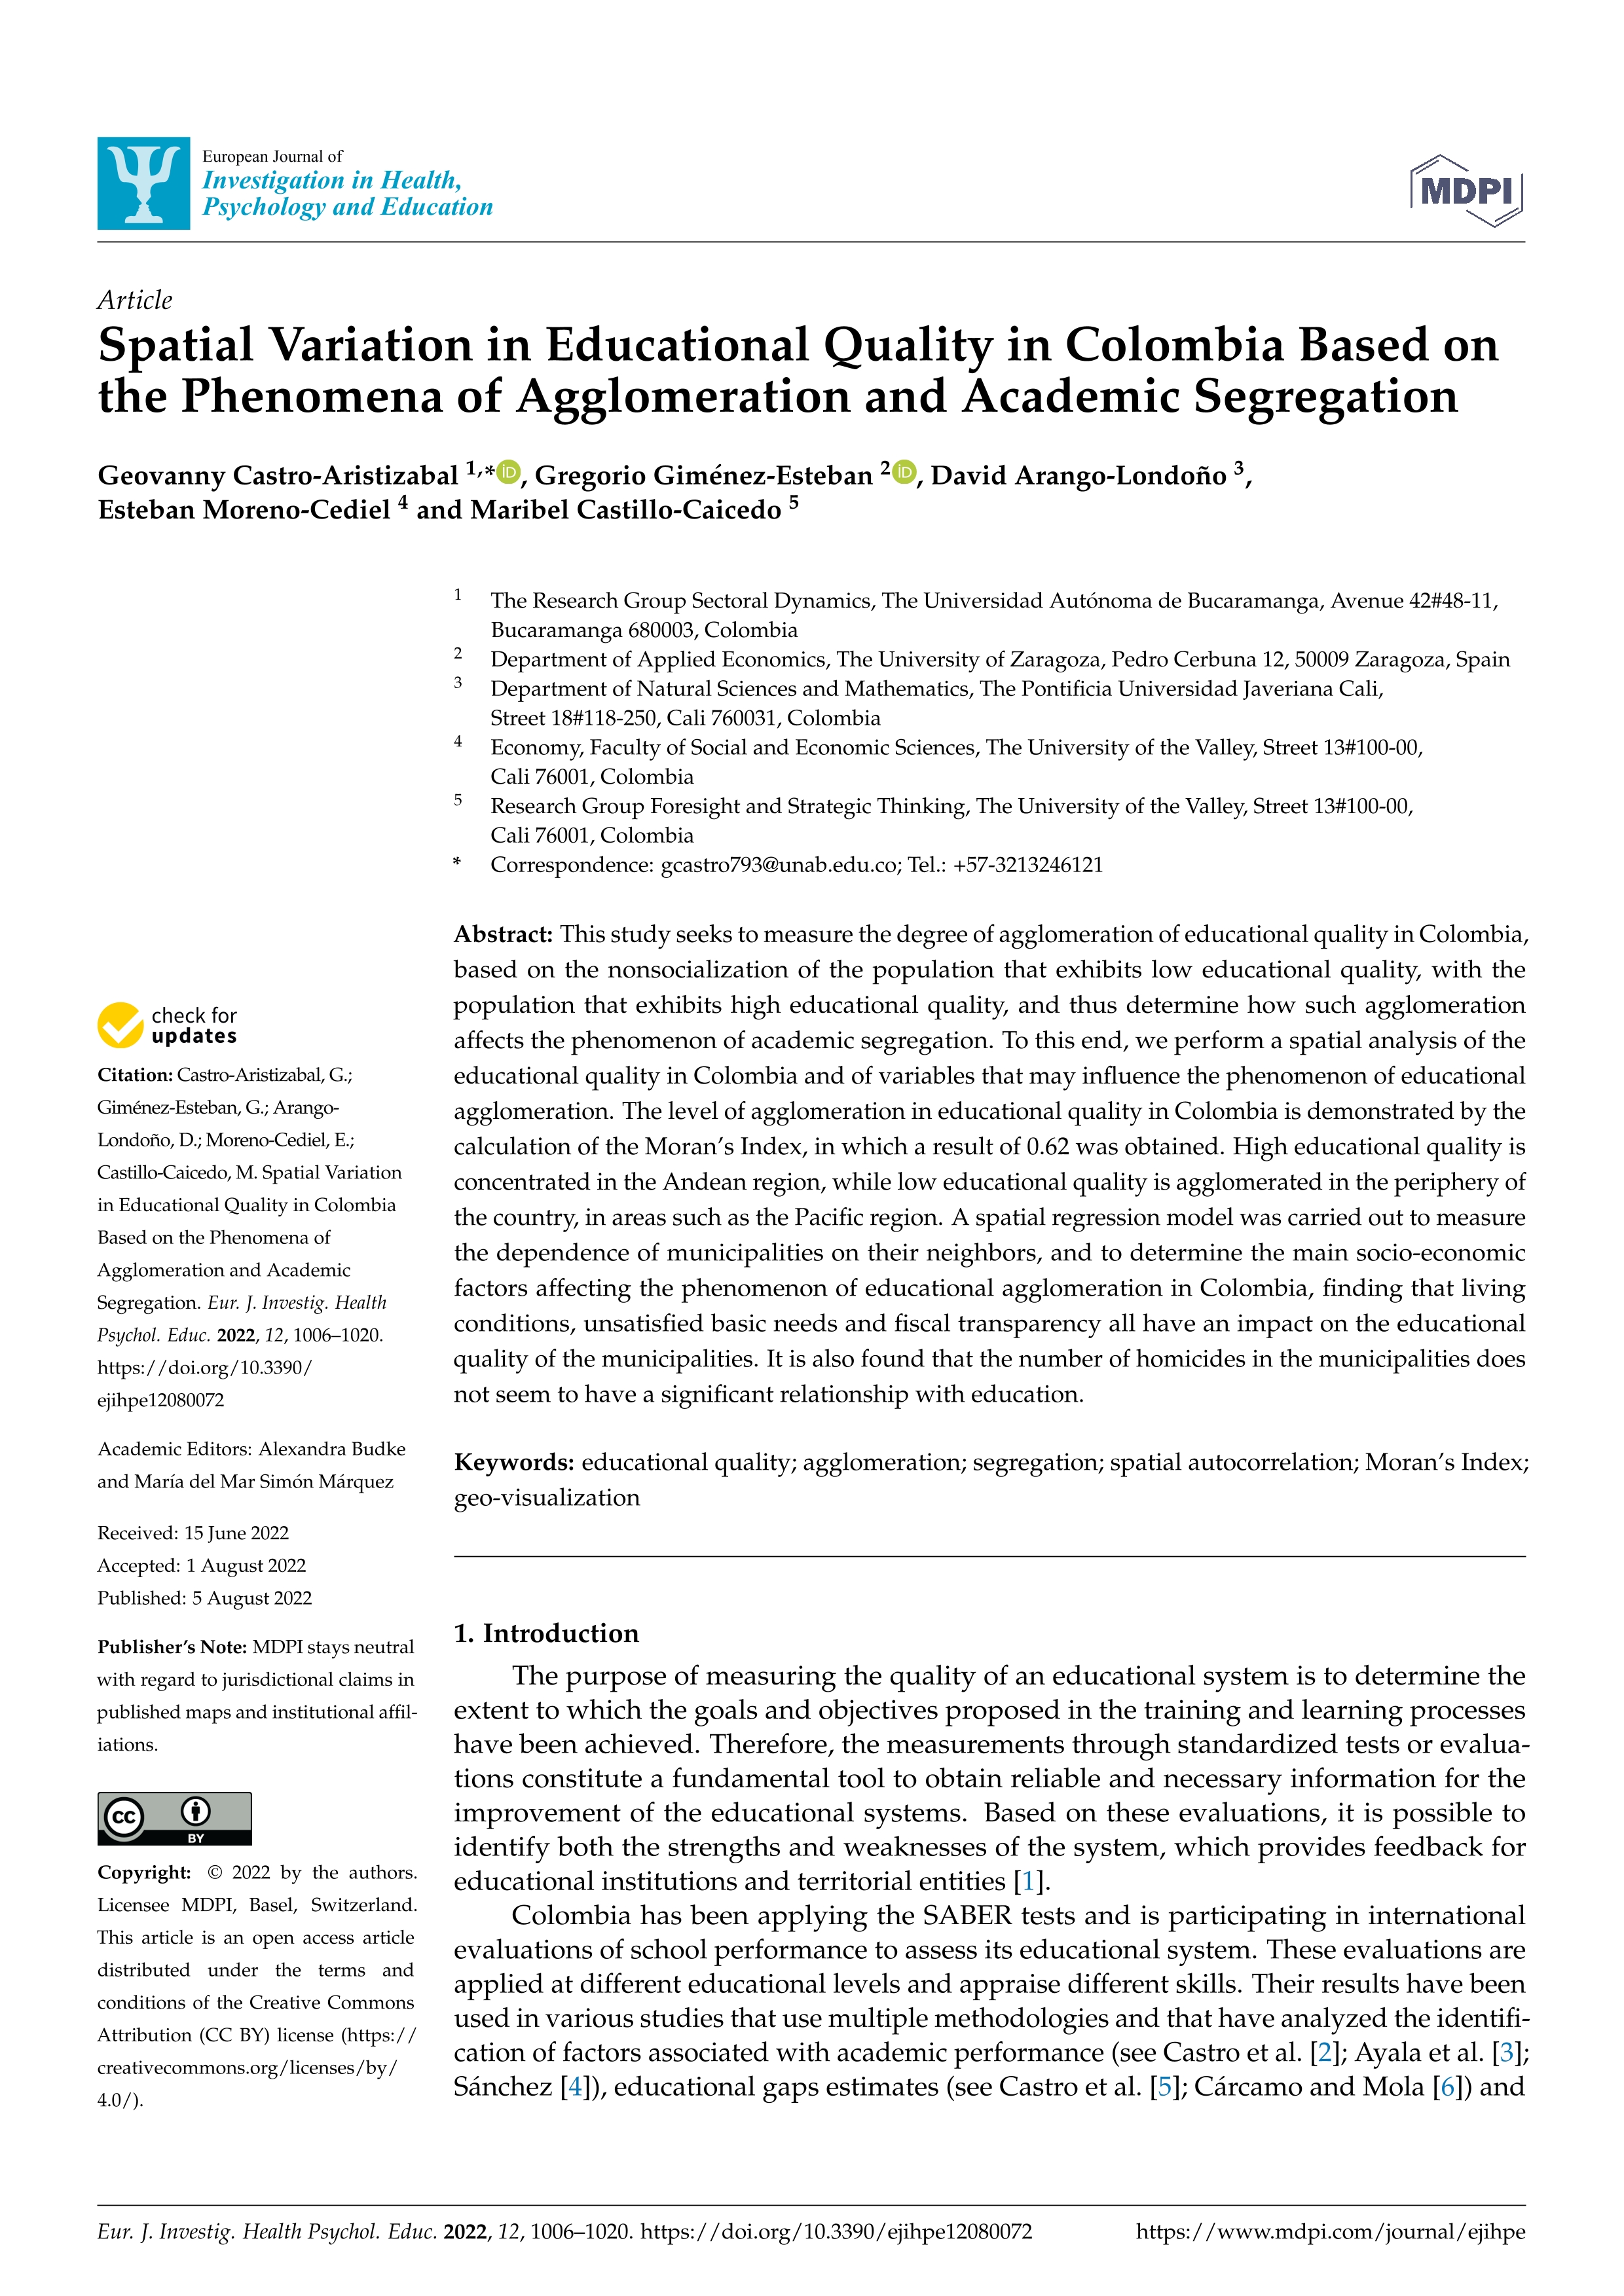 Spatial variation in educational quality in Colombia based on the phenomena of agglomeration and academic segregation